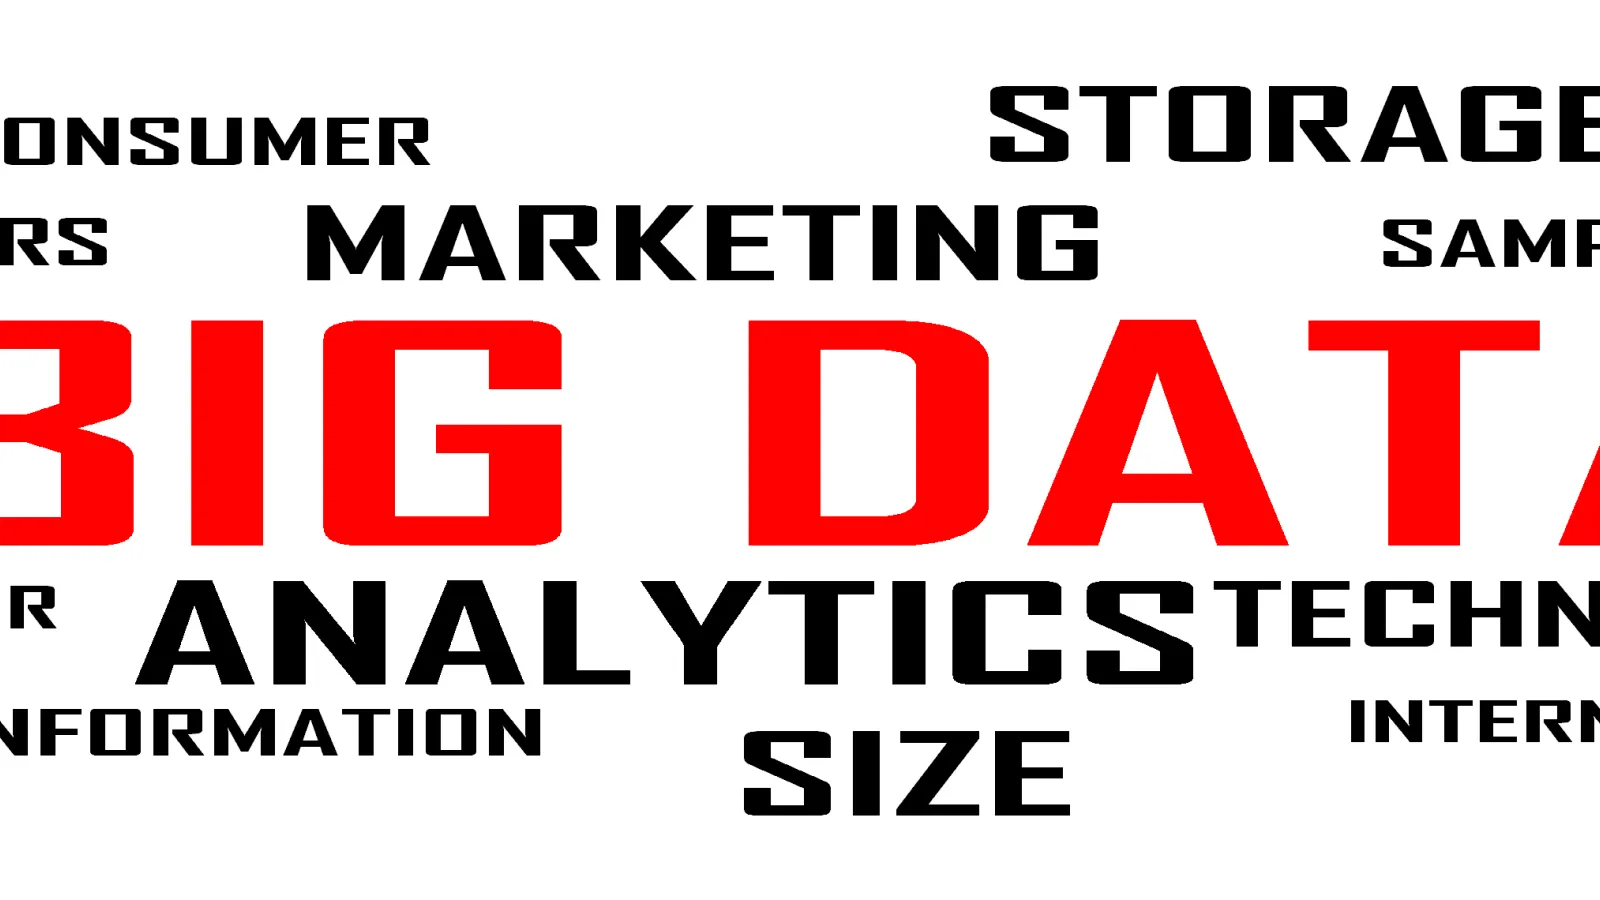 How Big Data strategies Can Increase Revenue and Reduce Costs for Media Companies